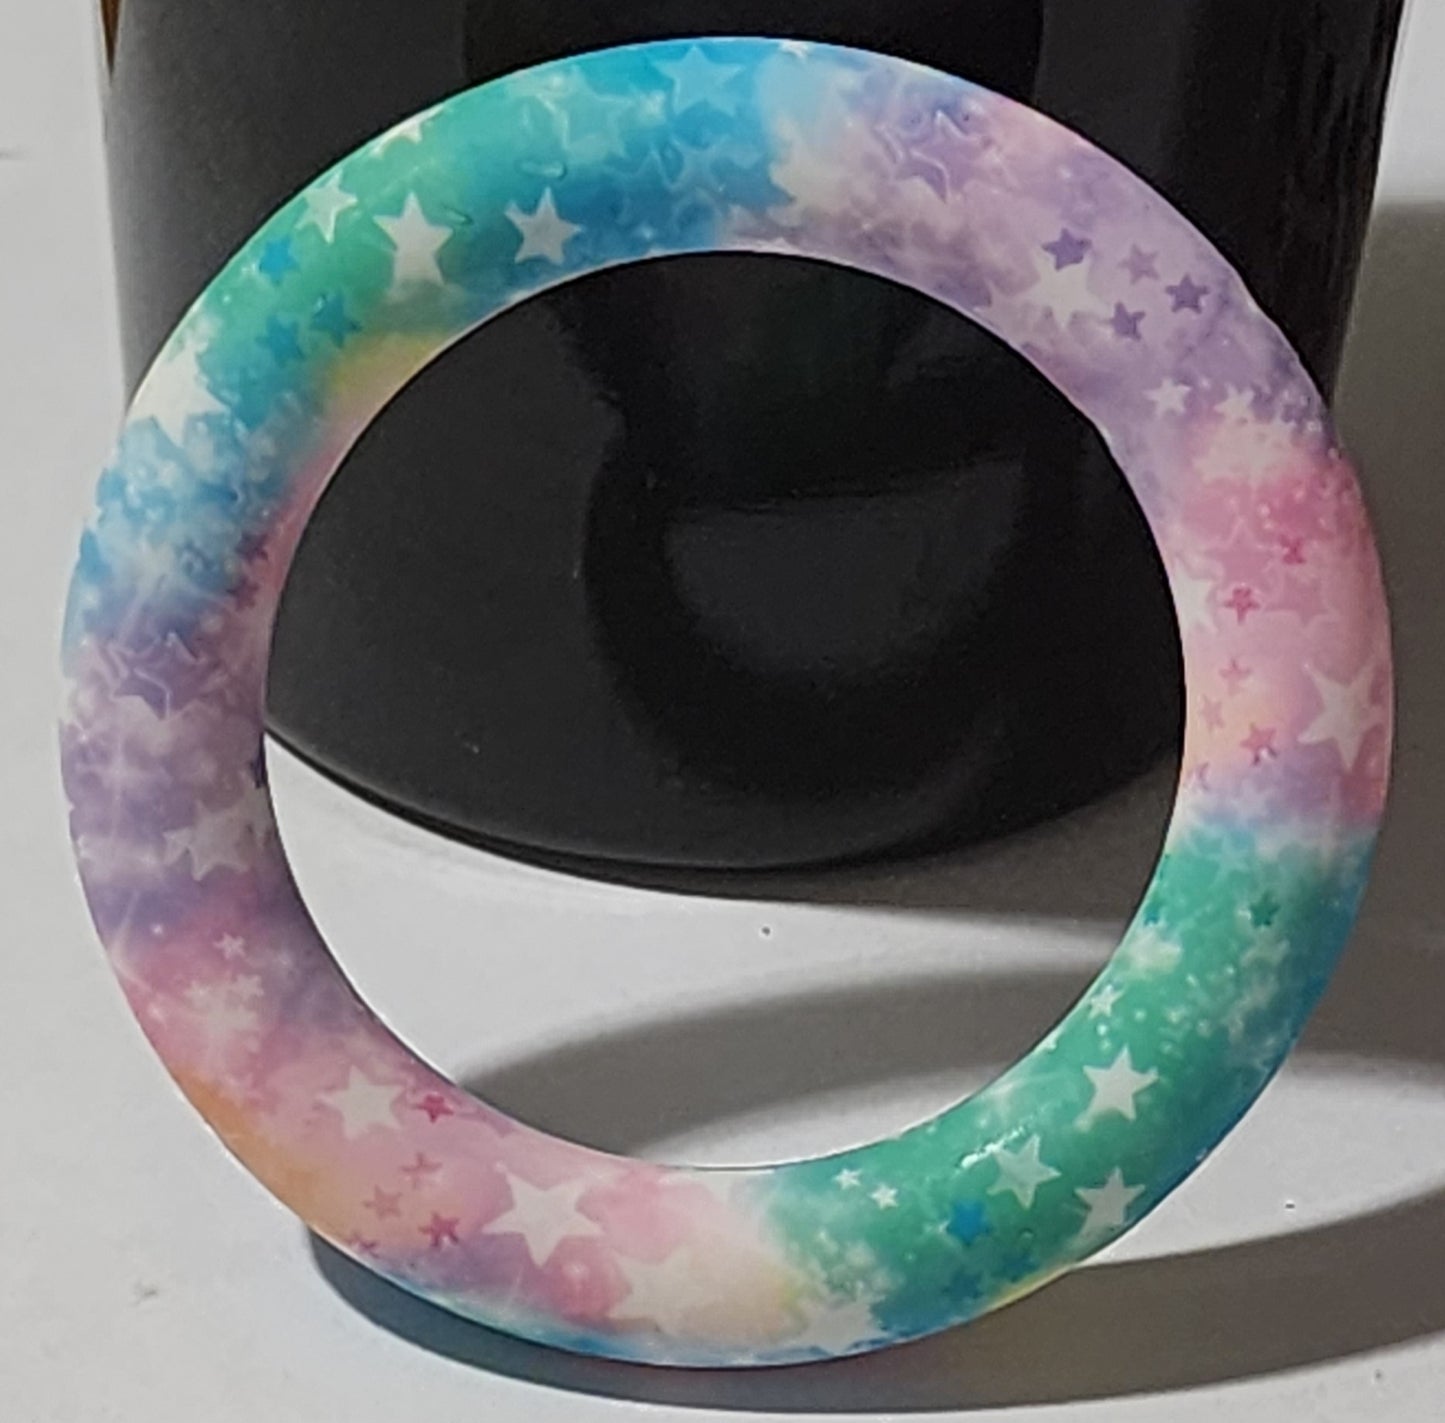 Tie dye Silicone ring